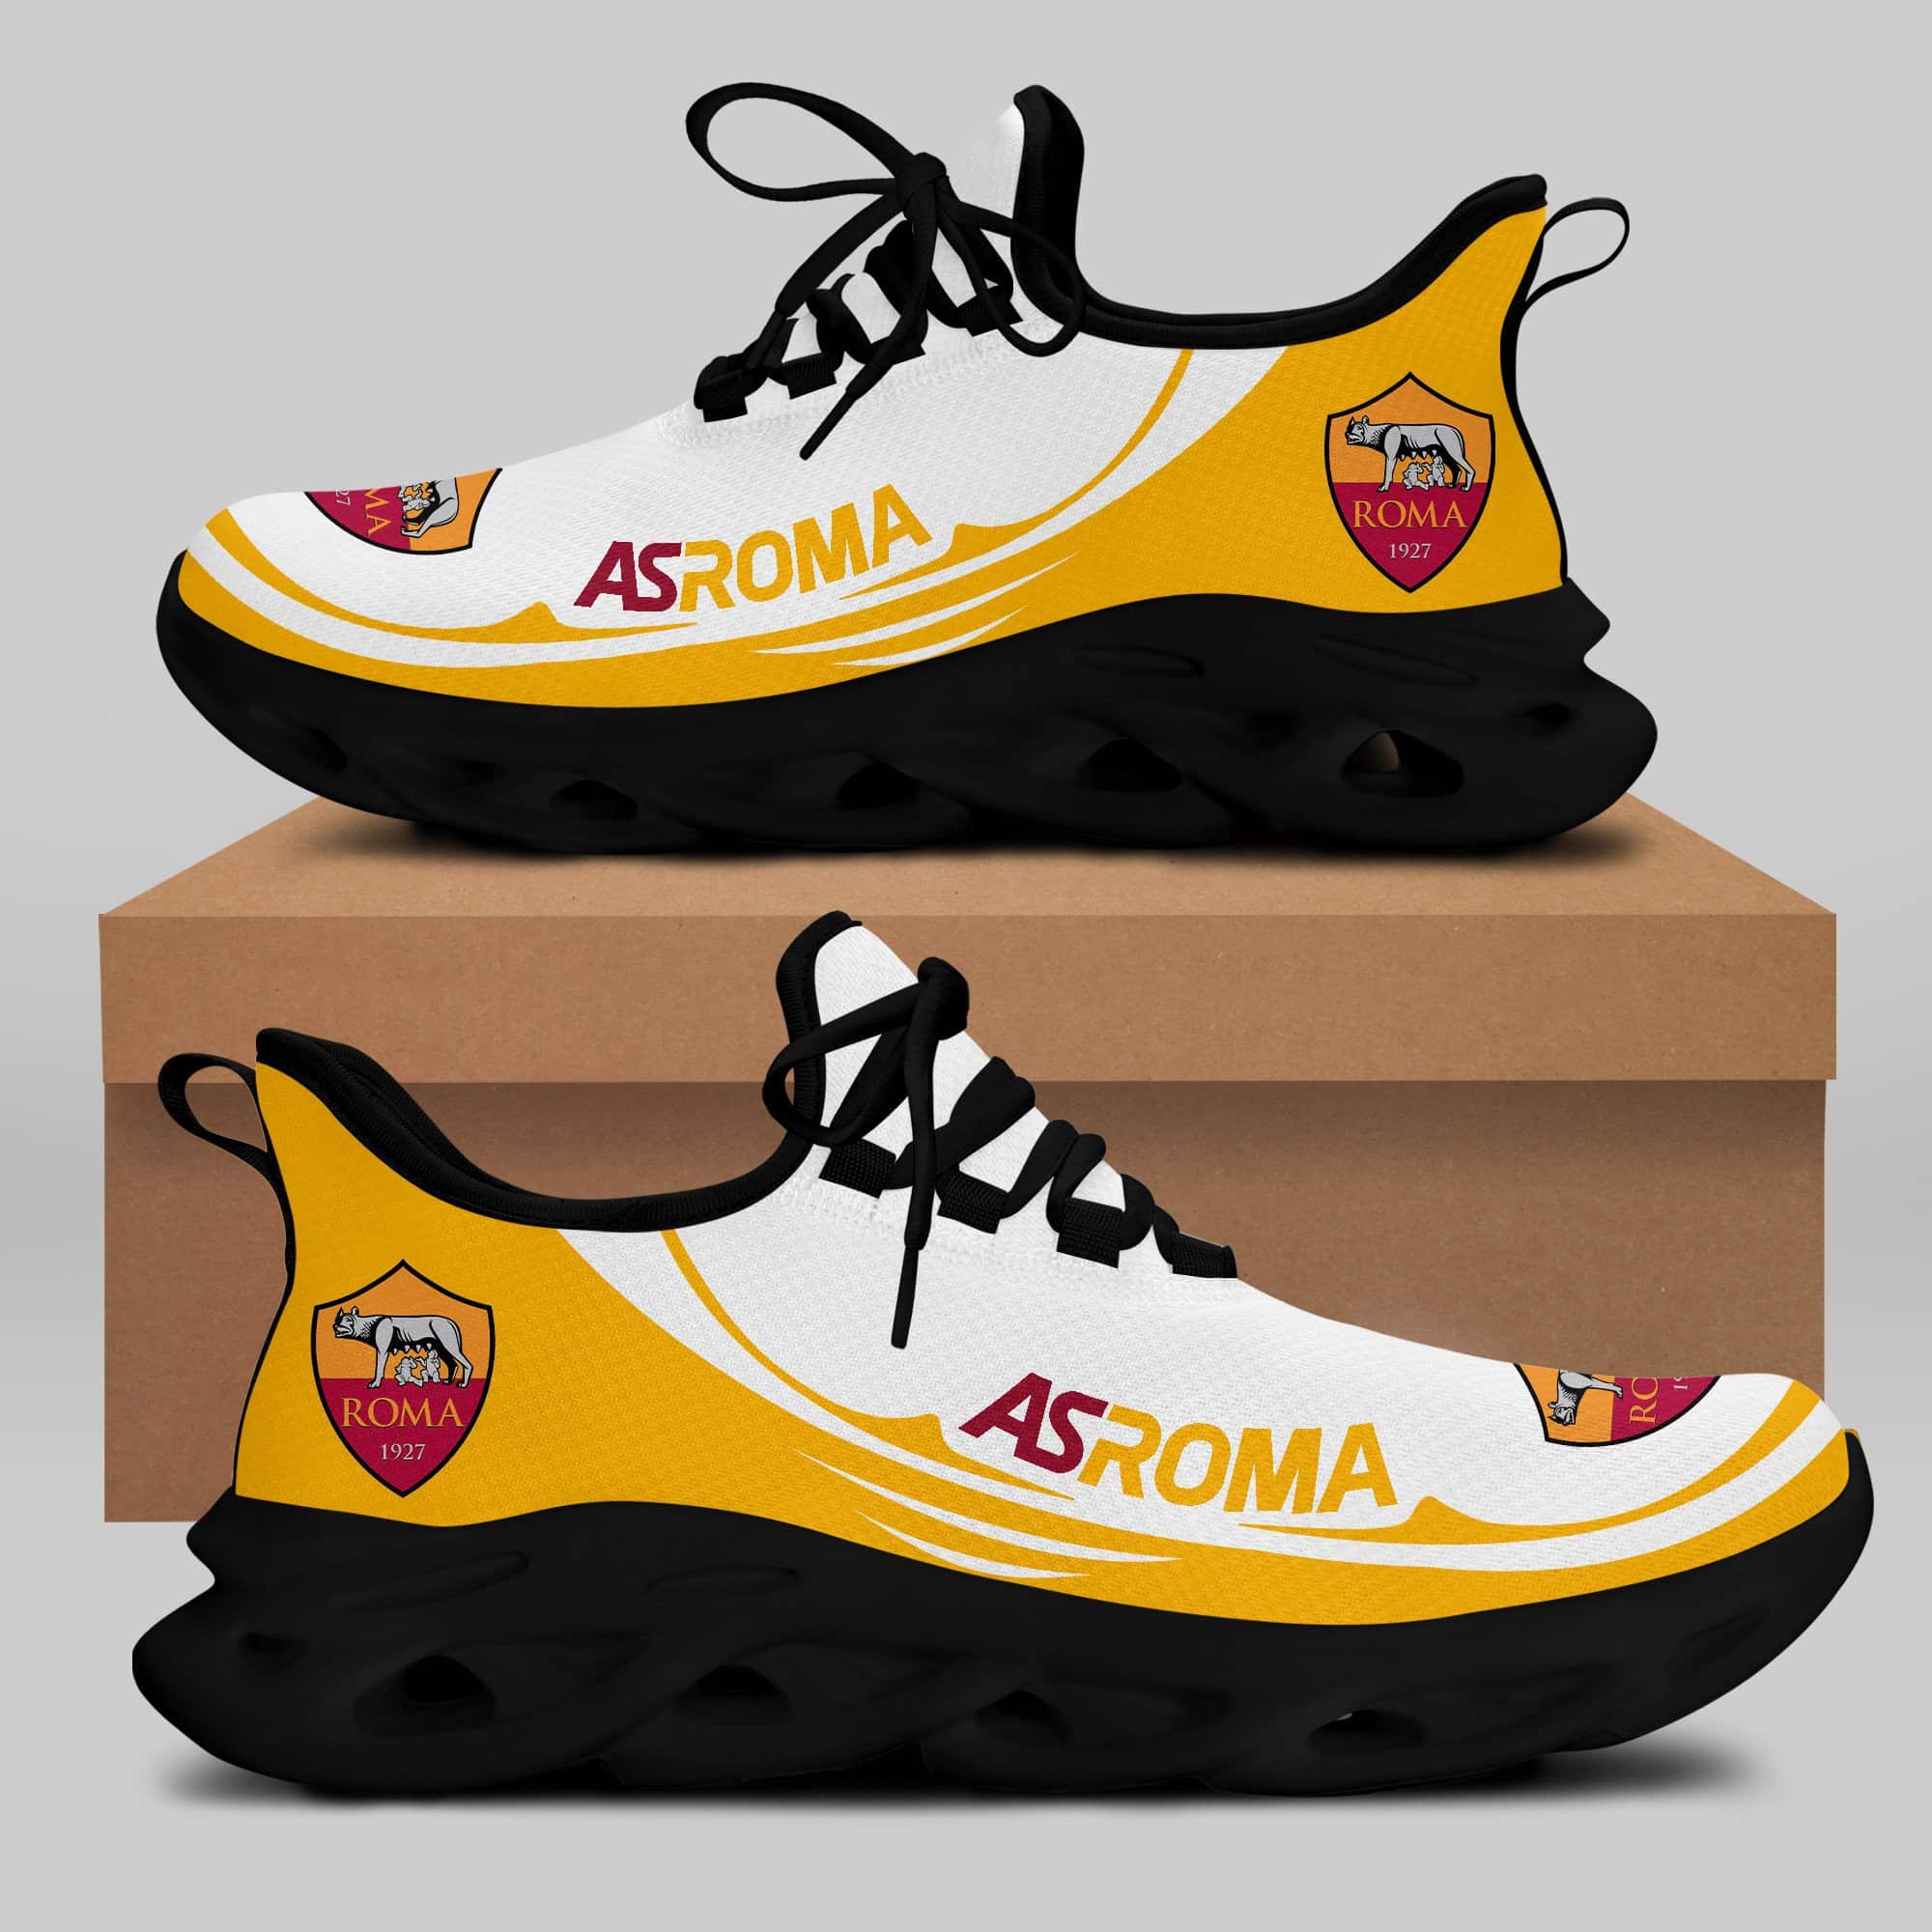 As Roma Running Shoes Max Soul Shoes Sneakers Ver 34 2